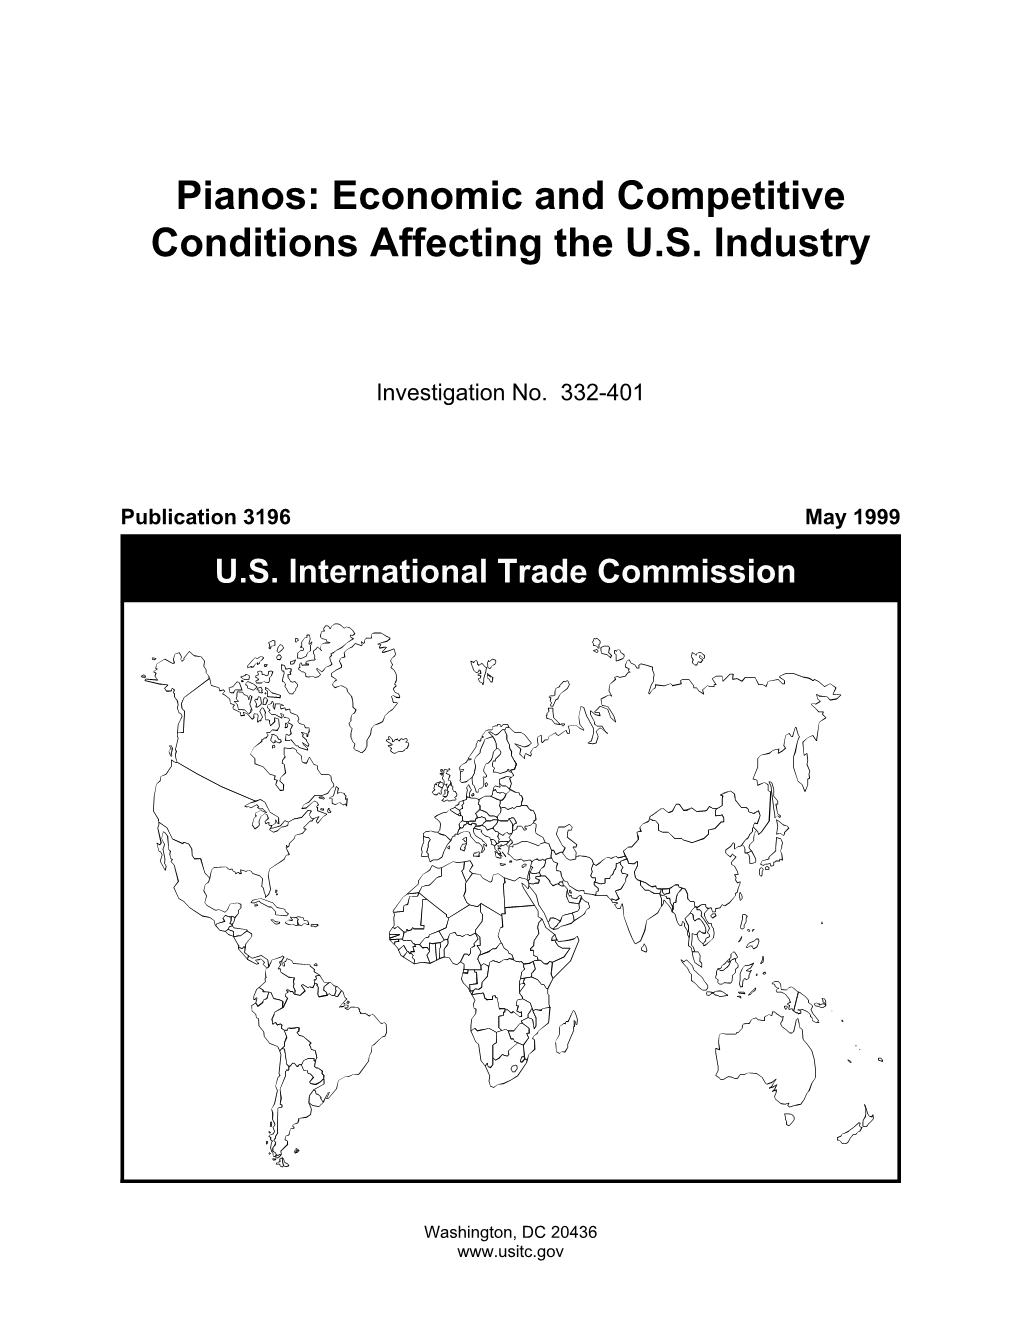 Pianos: Economic and Competitive Conditions Affecting the U.S